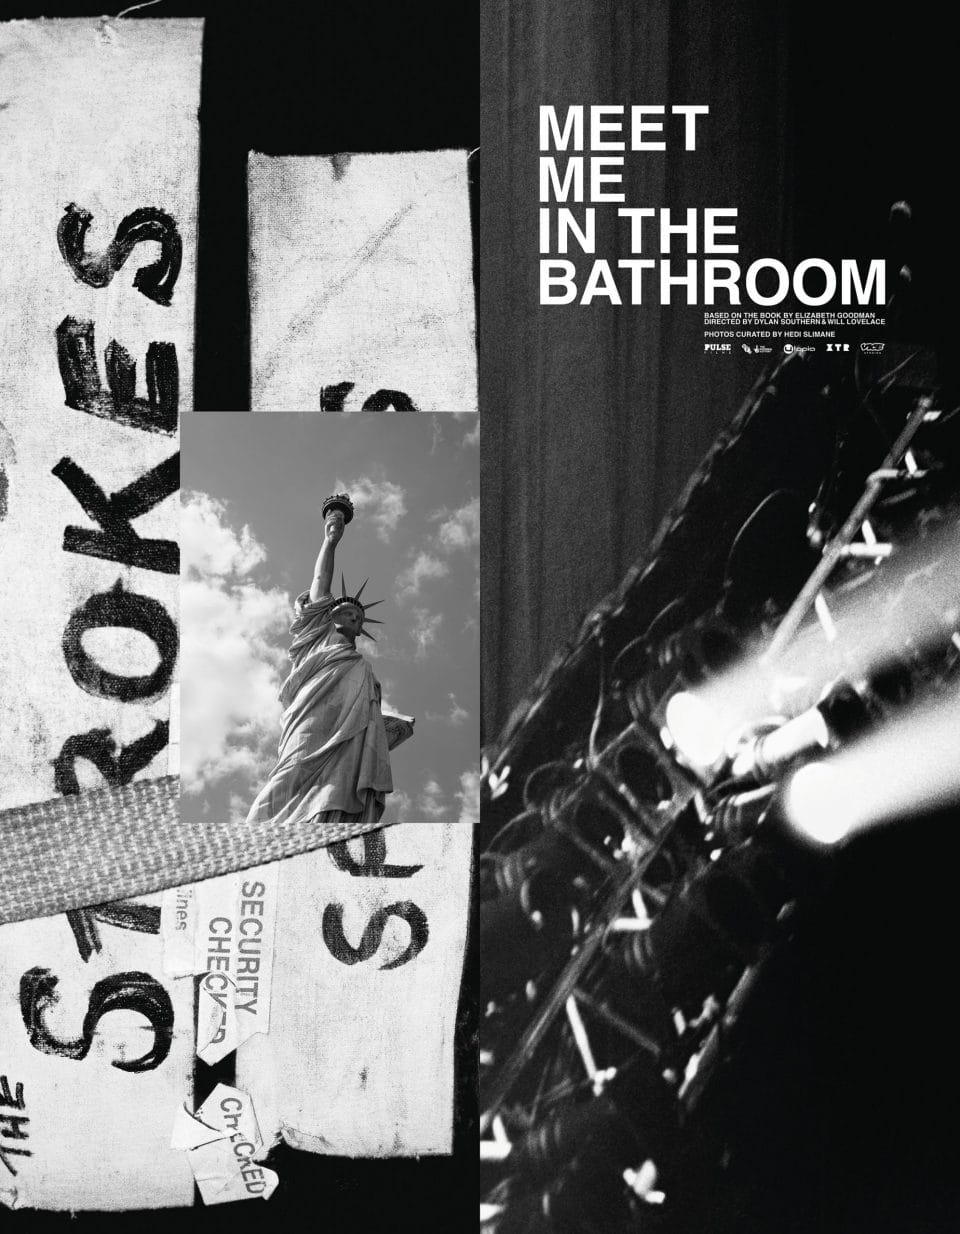 Celine's Hedi Slimane Retrieves Photographs From His Diary For 'Meet Me In The Bathroom'